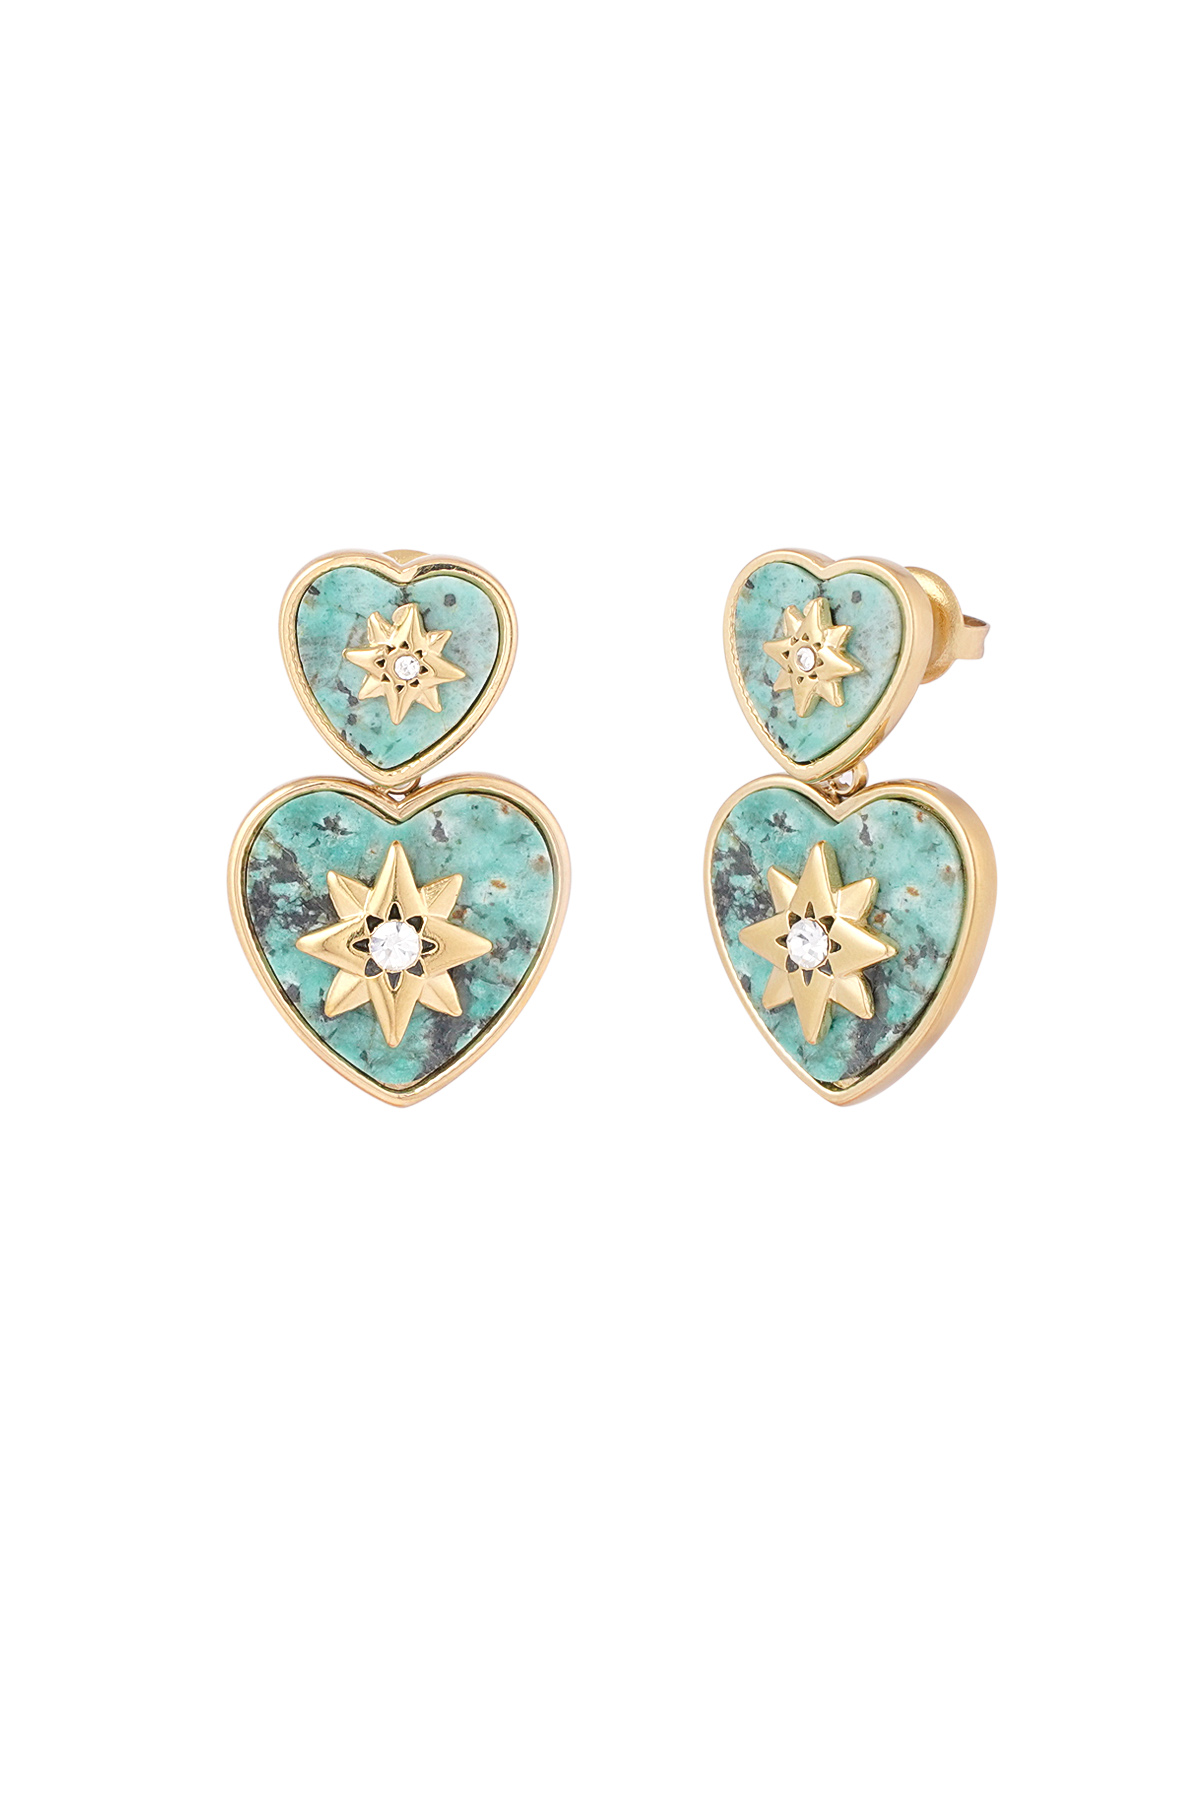 Heart earrings with compass - green